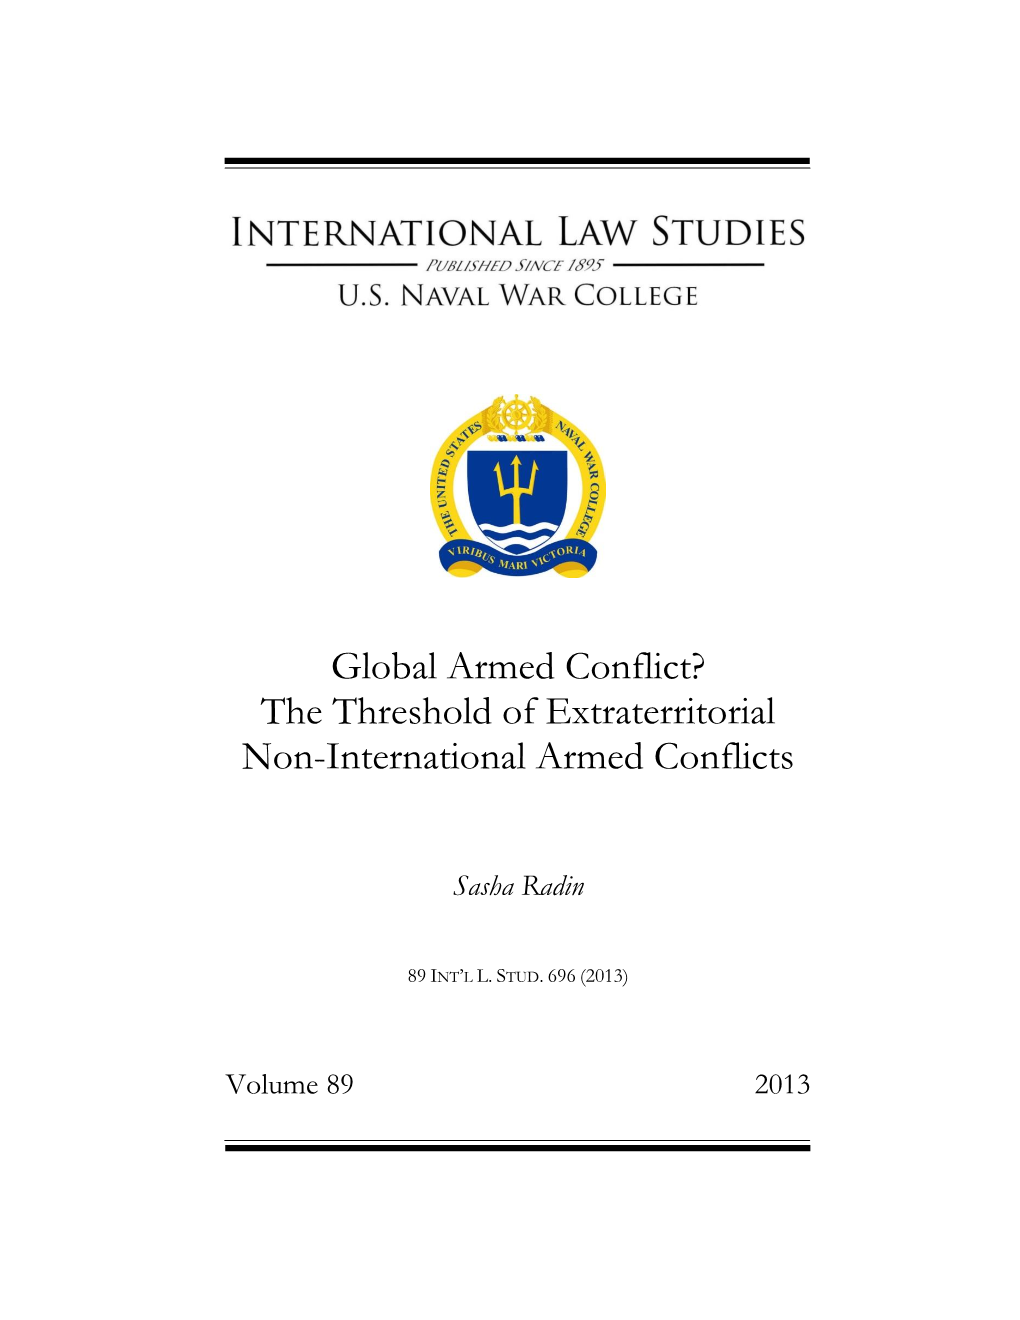 Global Armed Conflict? the Threshold of Extraterritorial Non-International Armed Conflicts